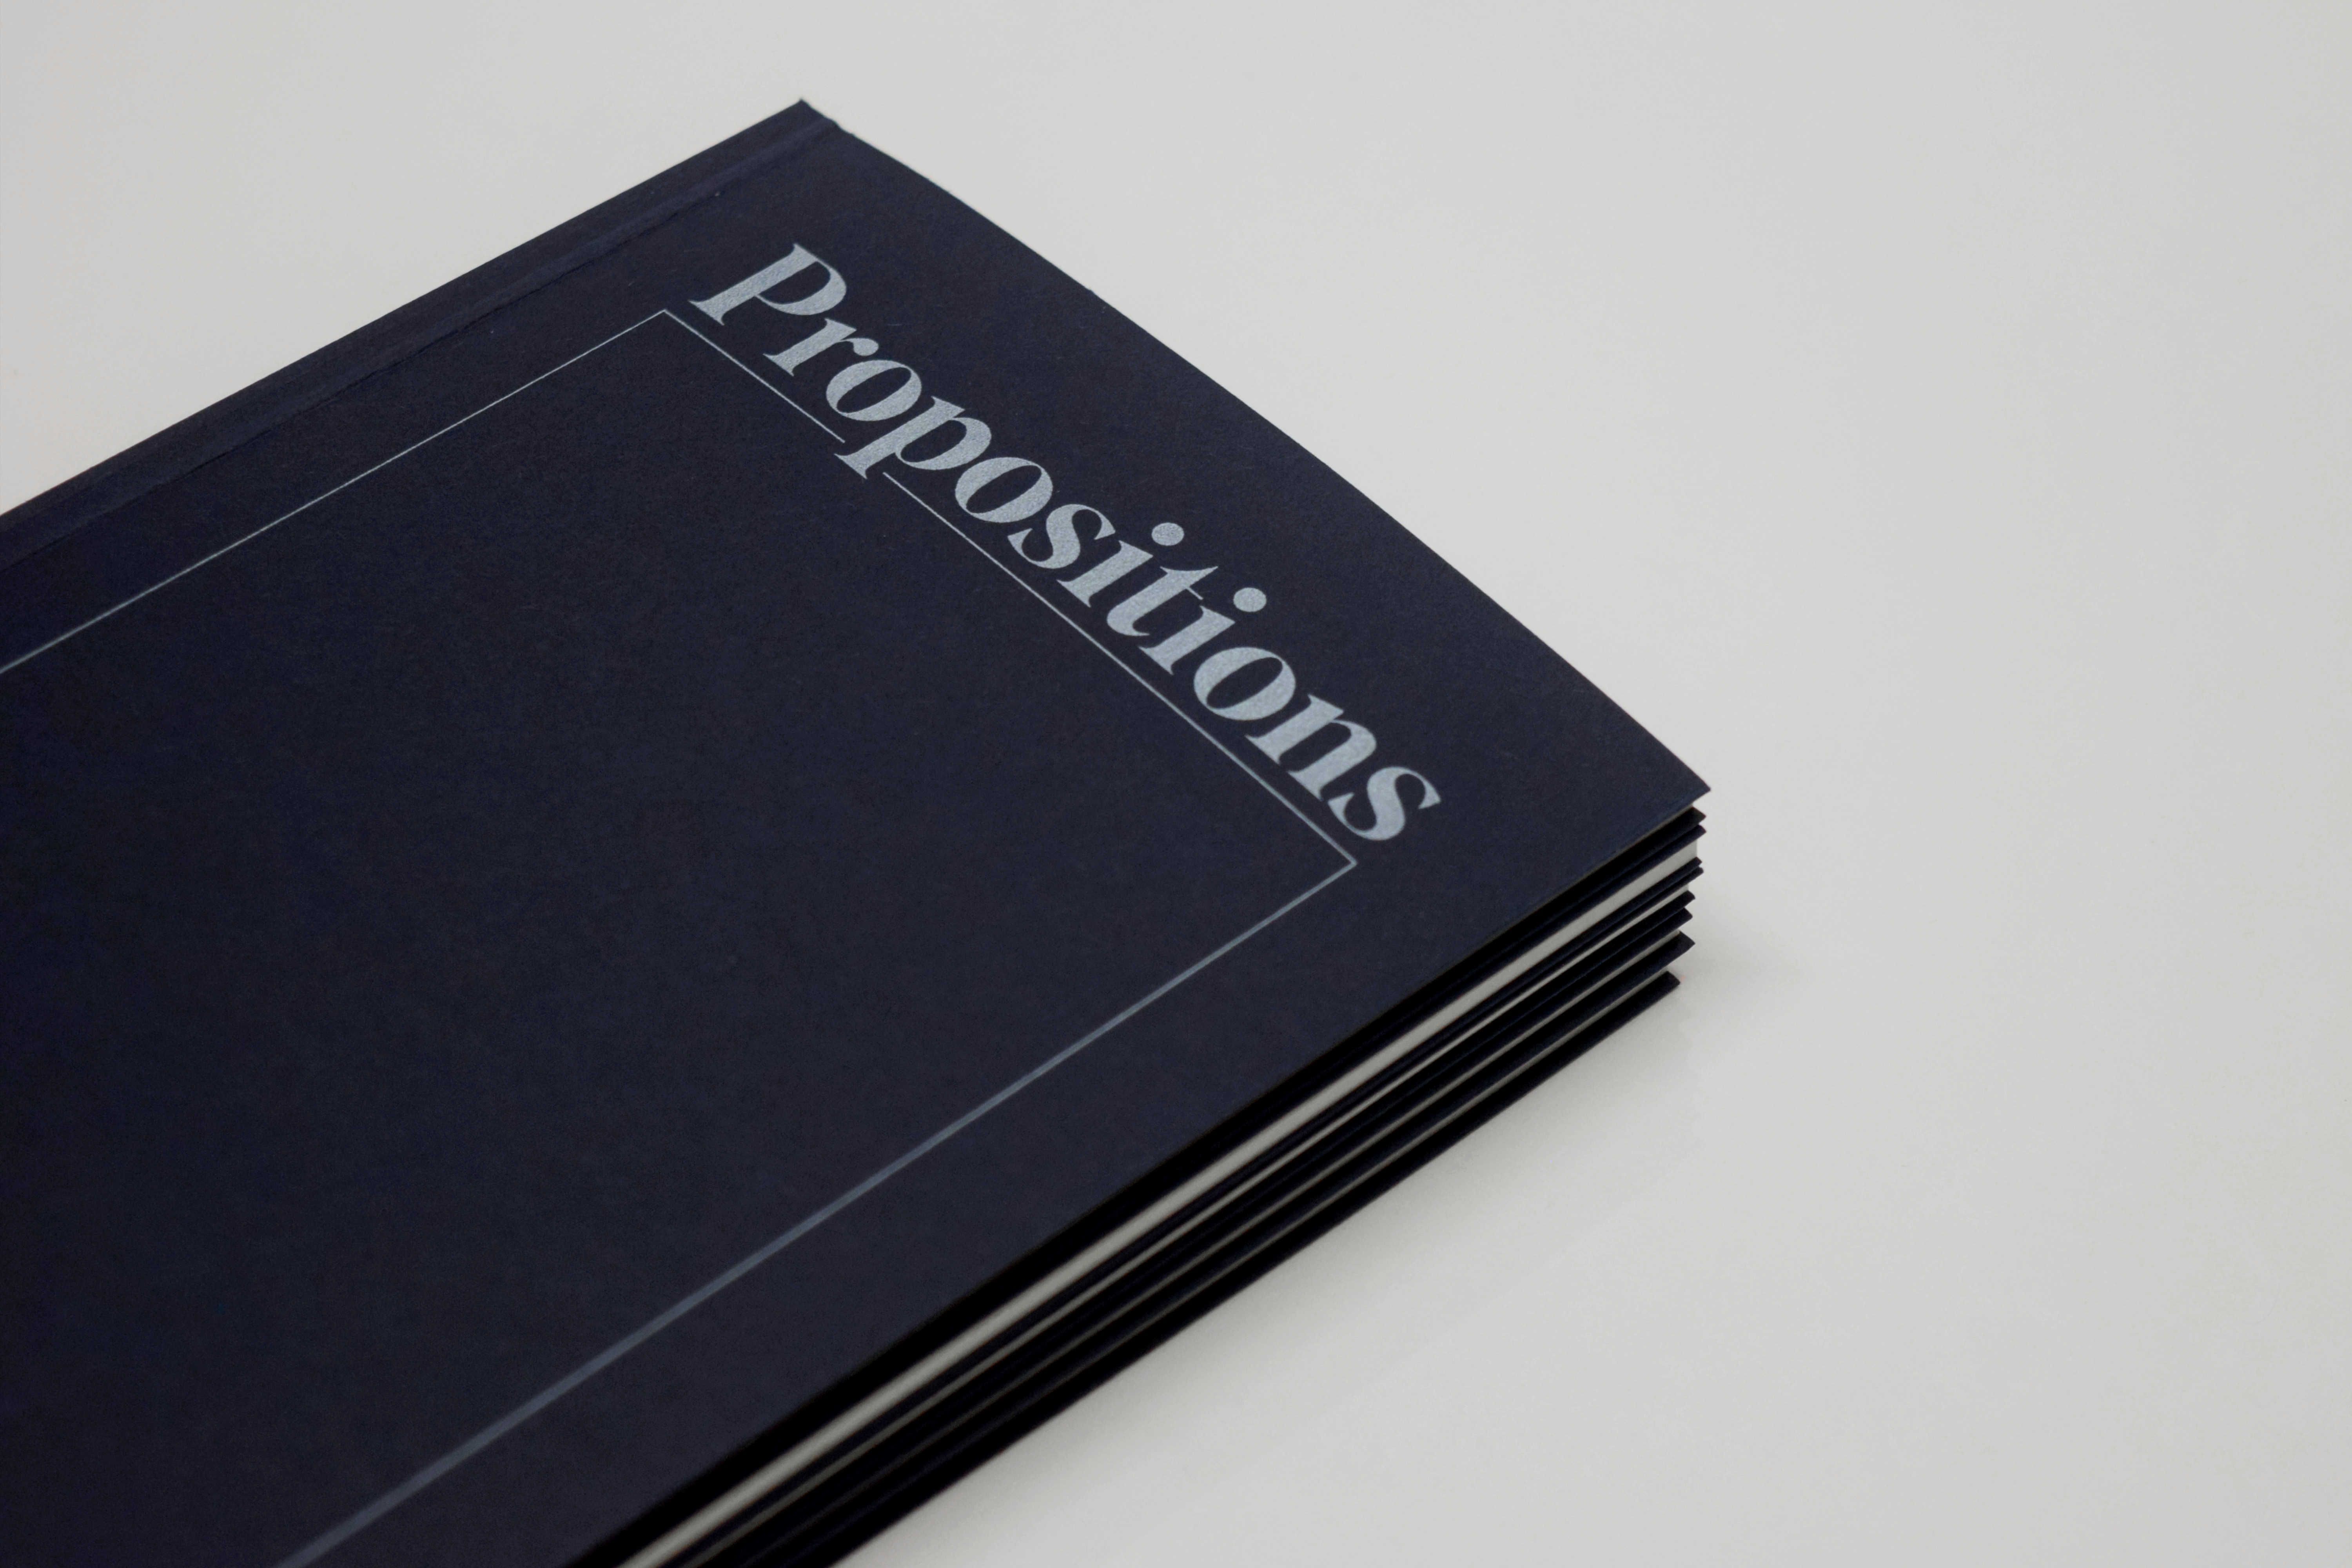 a photo of Propositions book